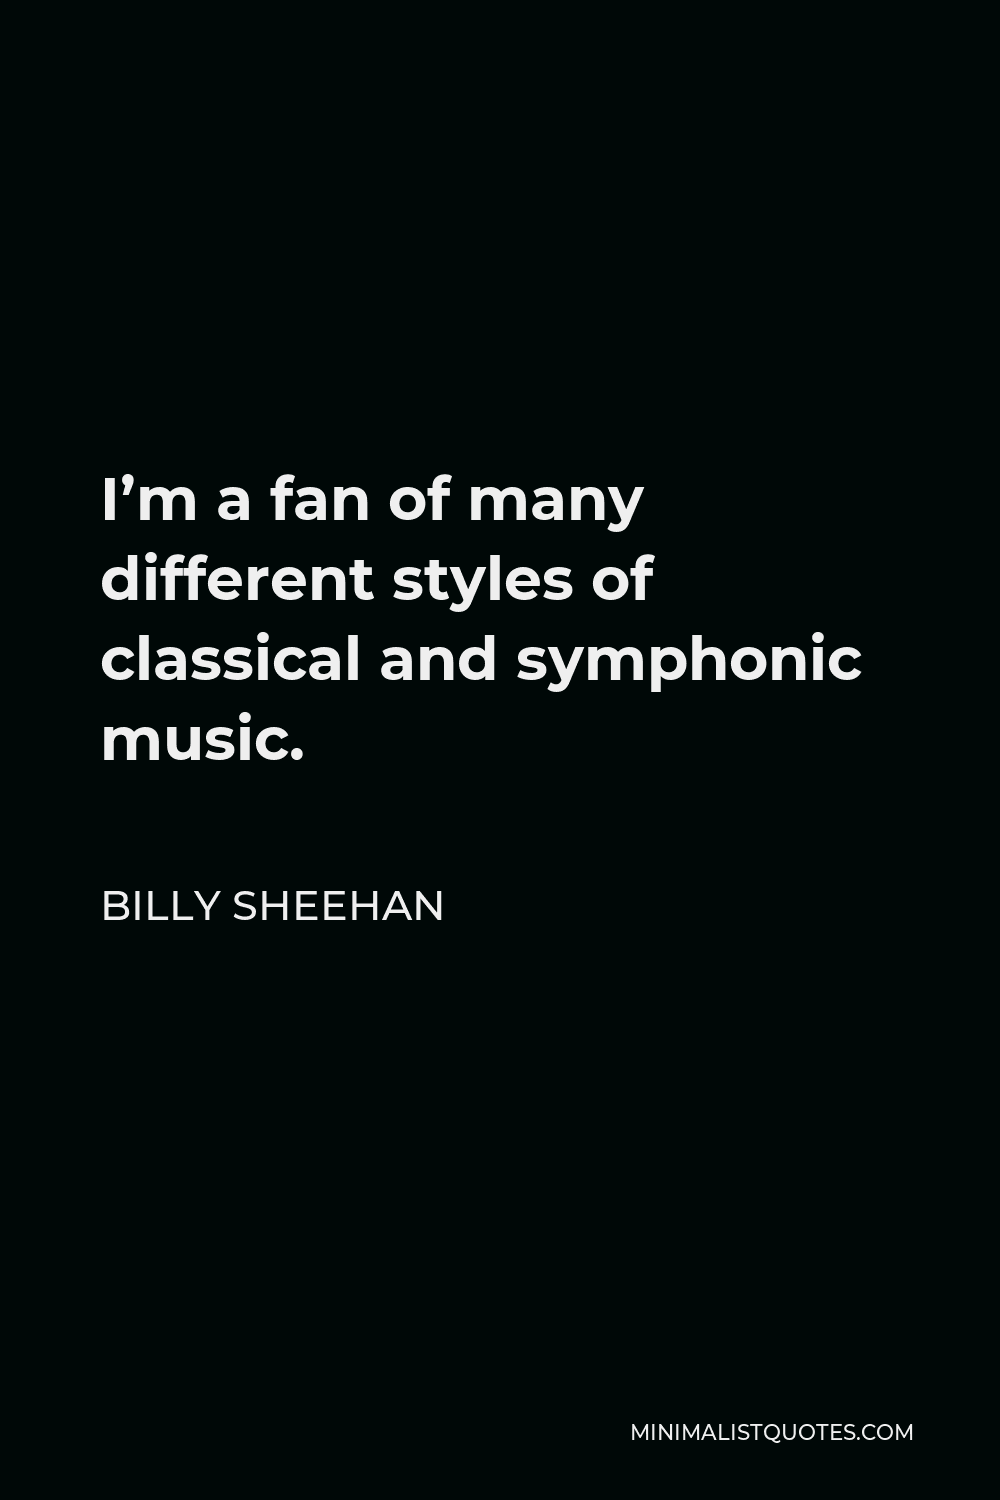 Billy Sheehan Quote - I’m a fan of many different styles of classical and symphonic music.